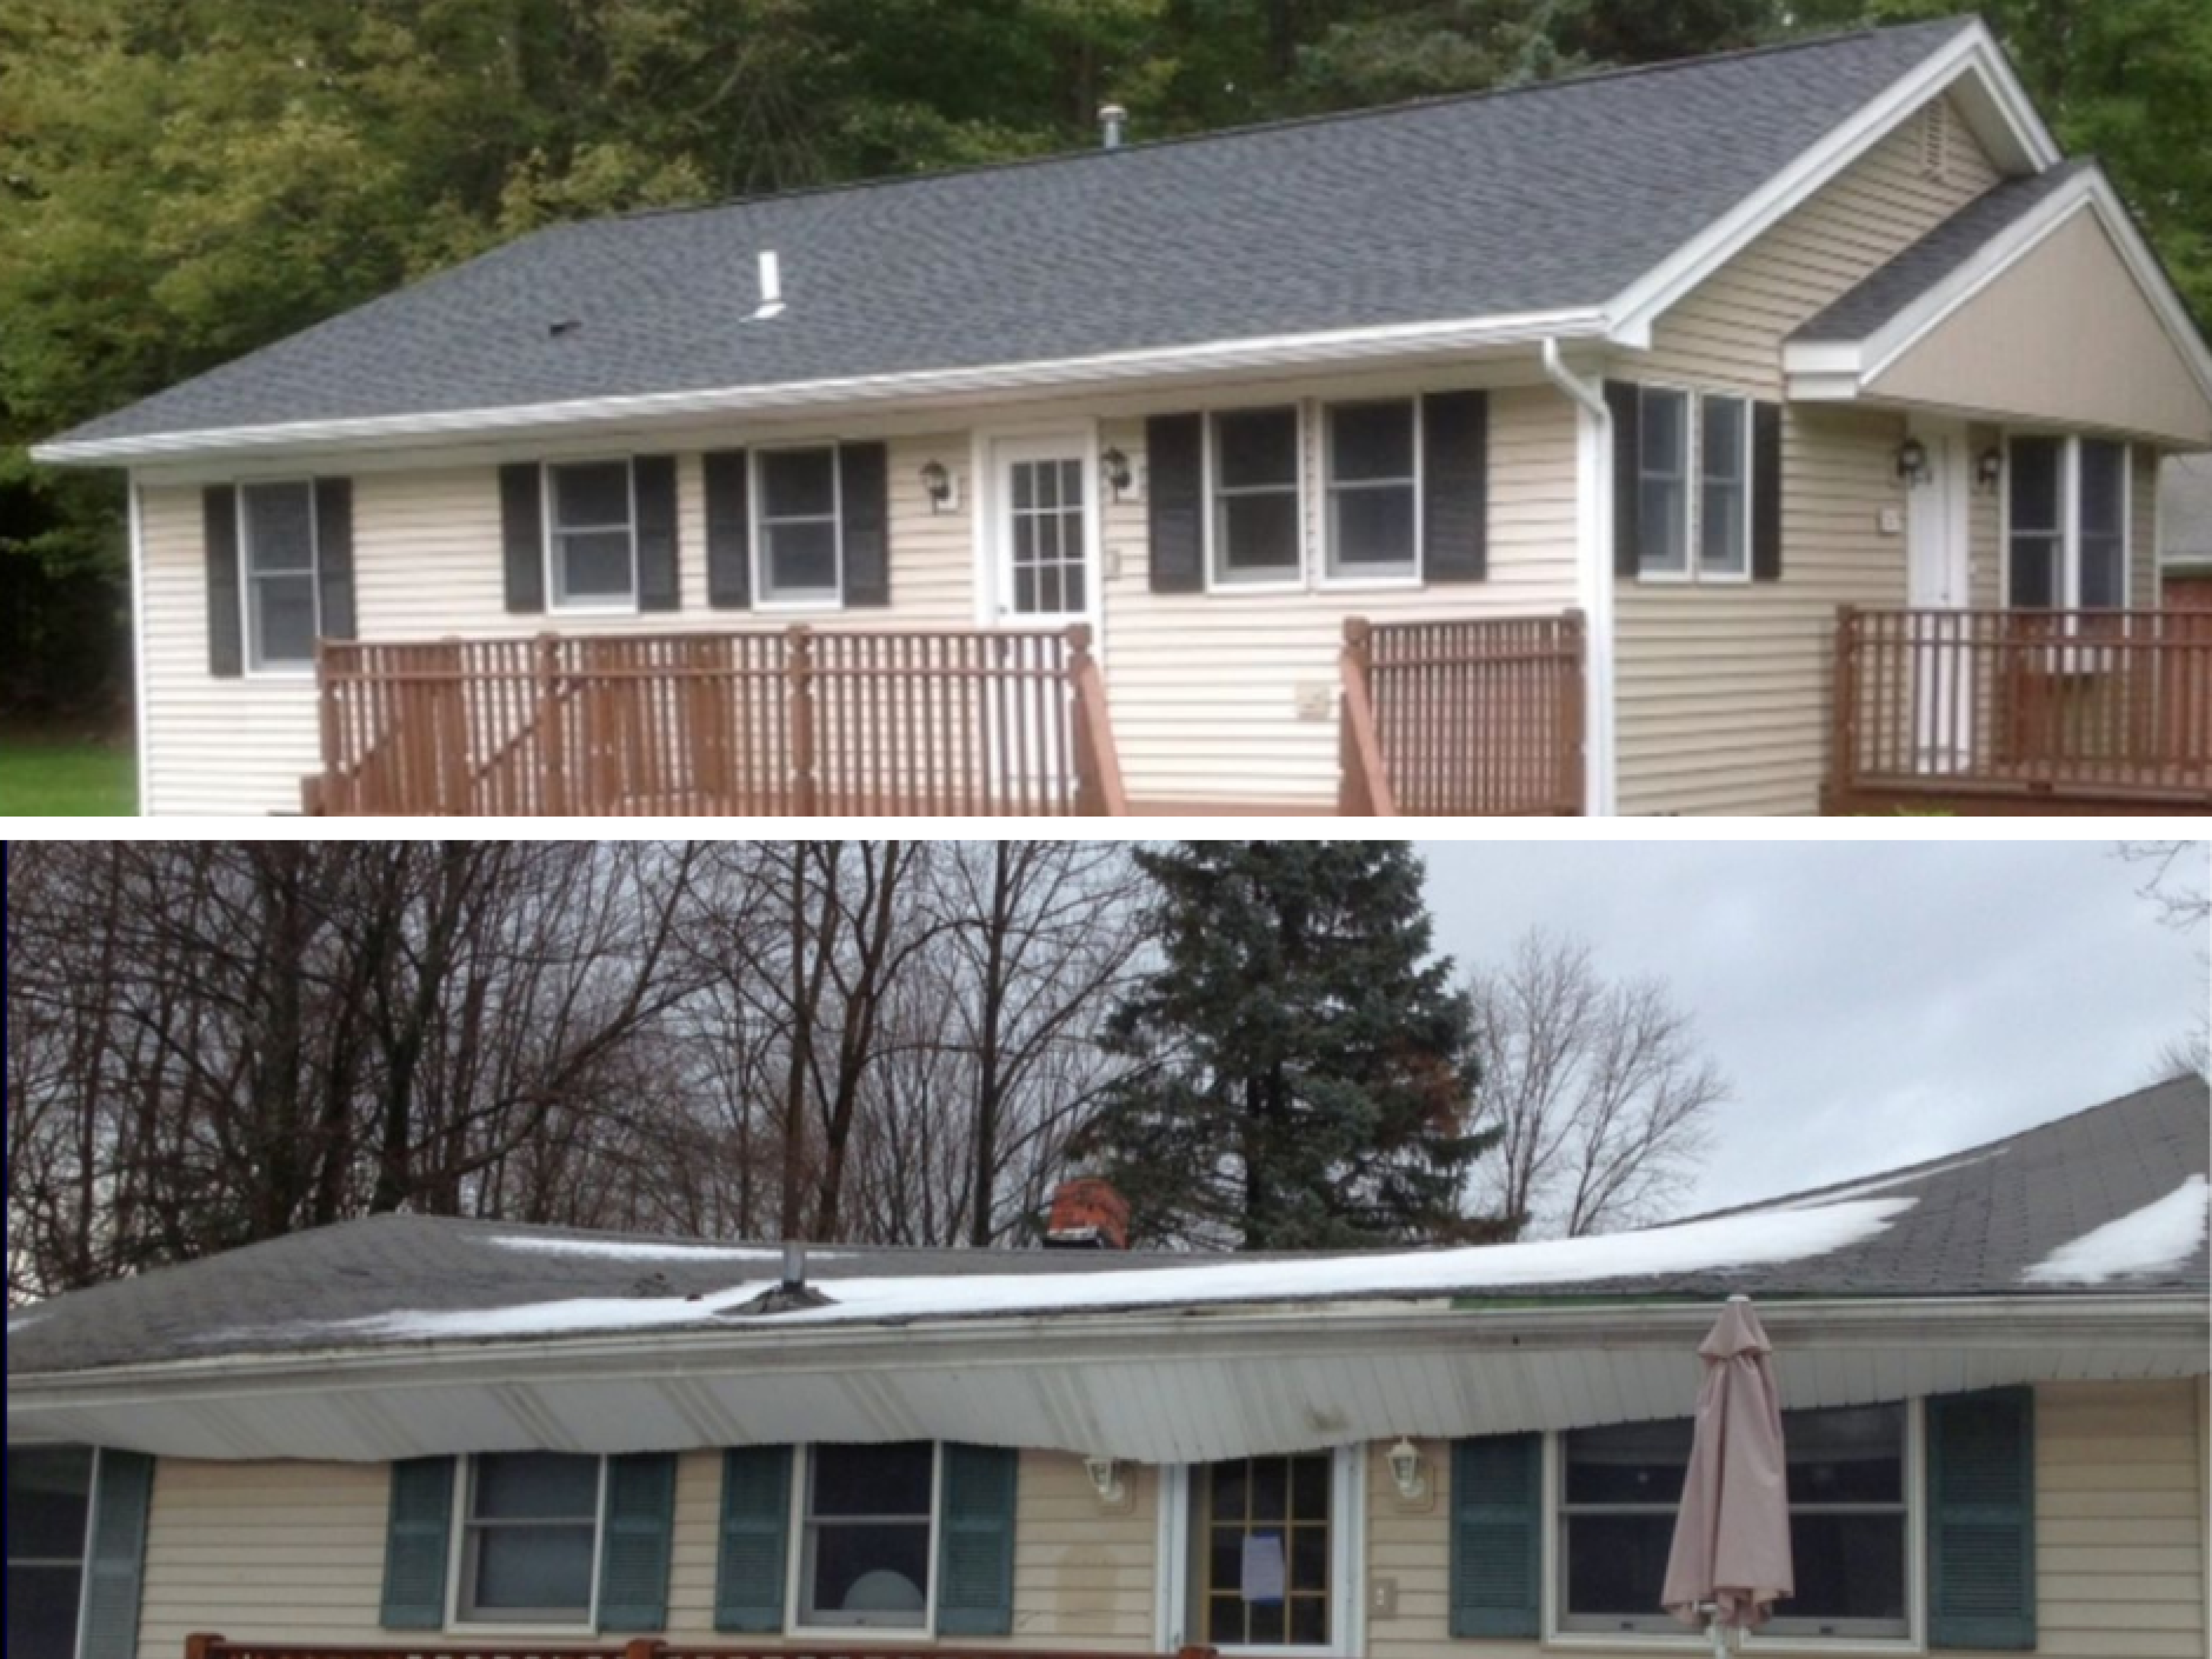 Orchard Park - Before and After